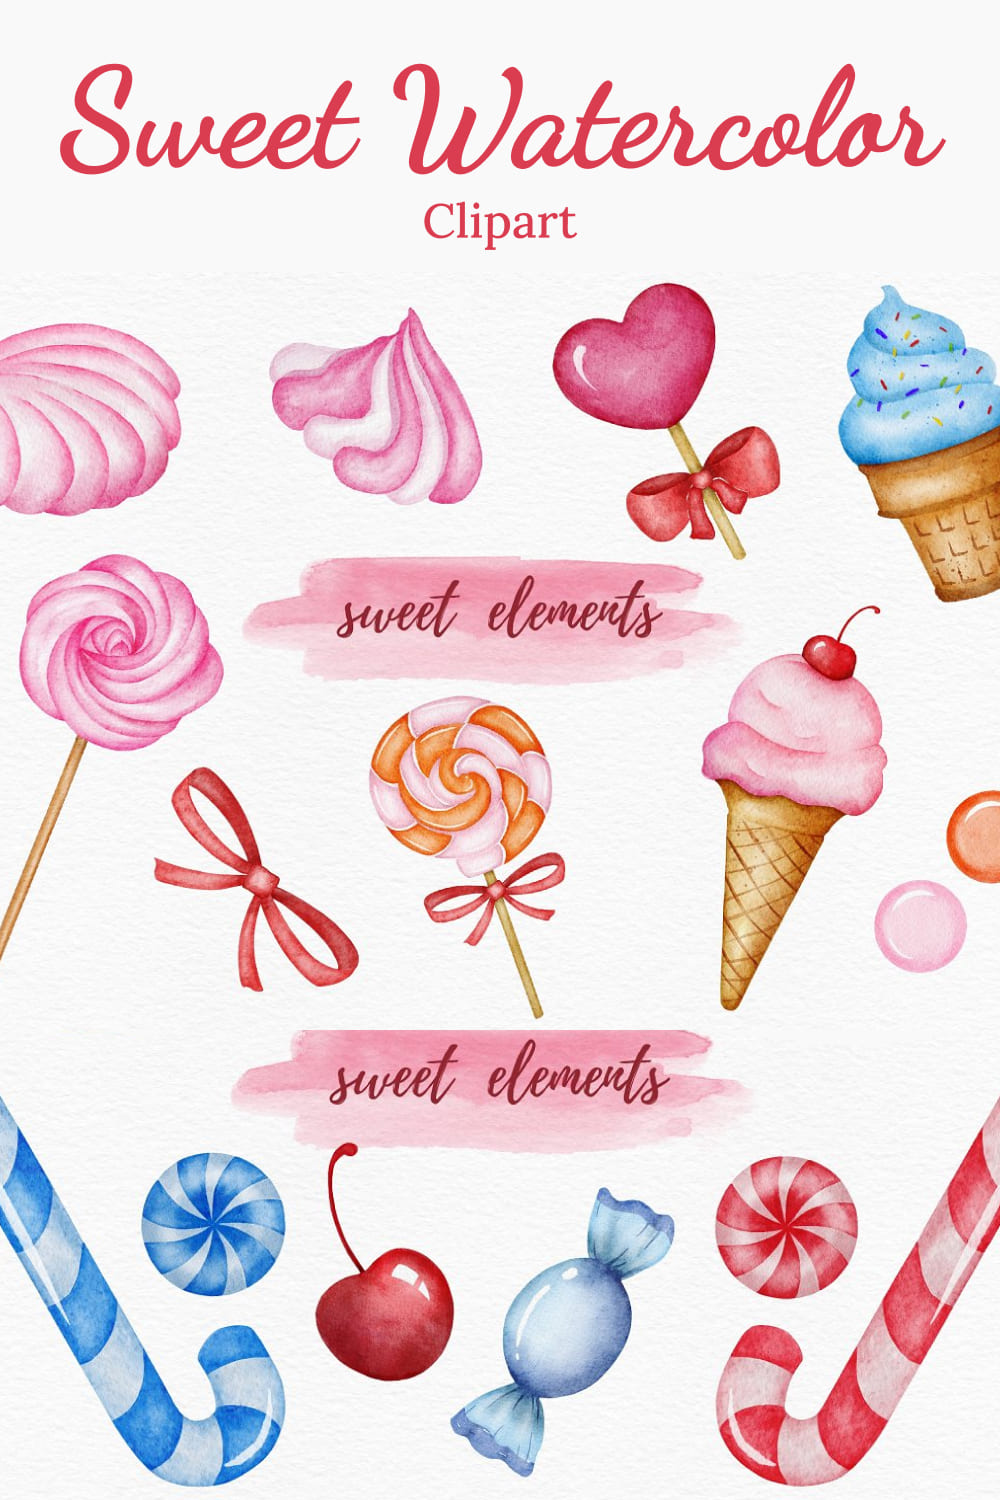 sweet watercolor clipart 03